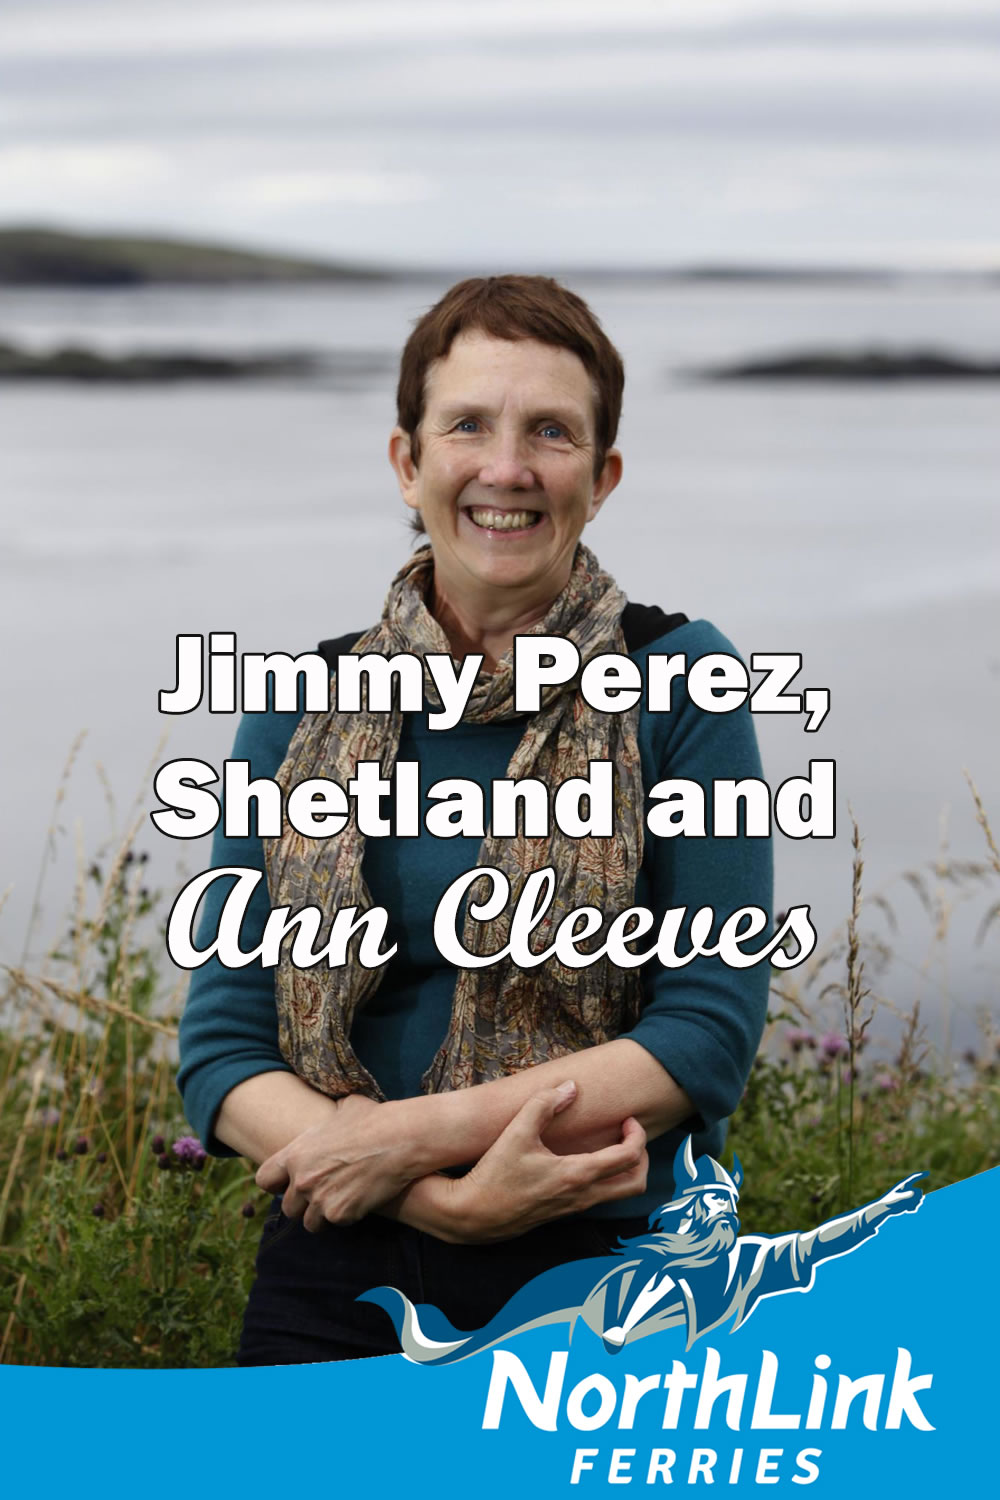 Jimmy Perez, Shetland and Ann Cleeves